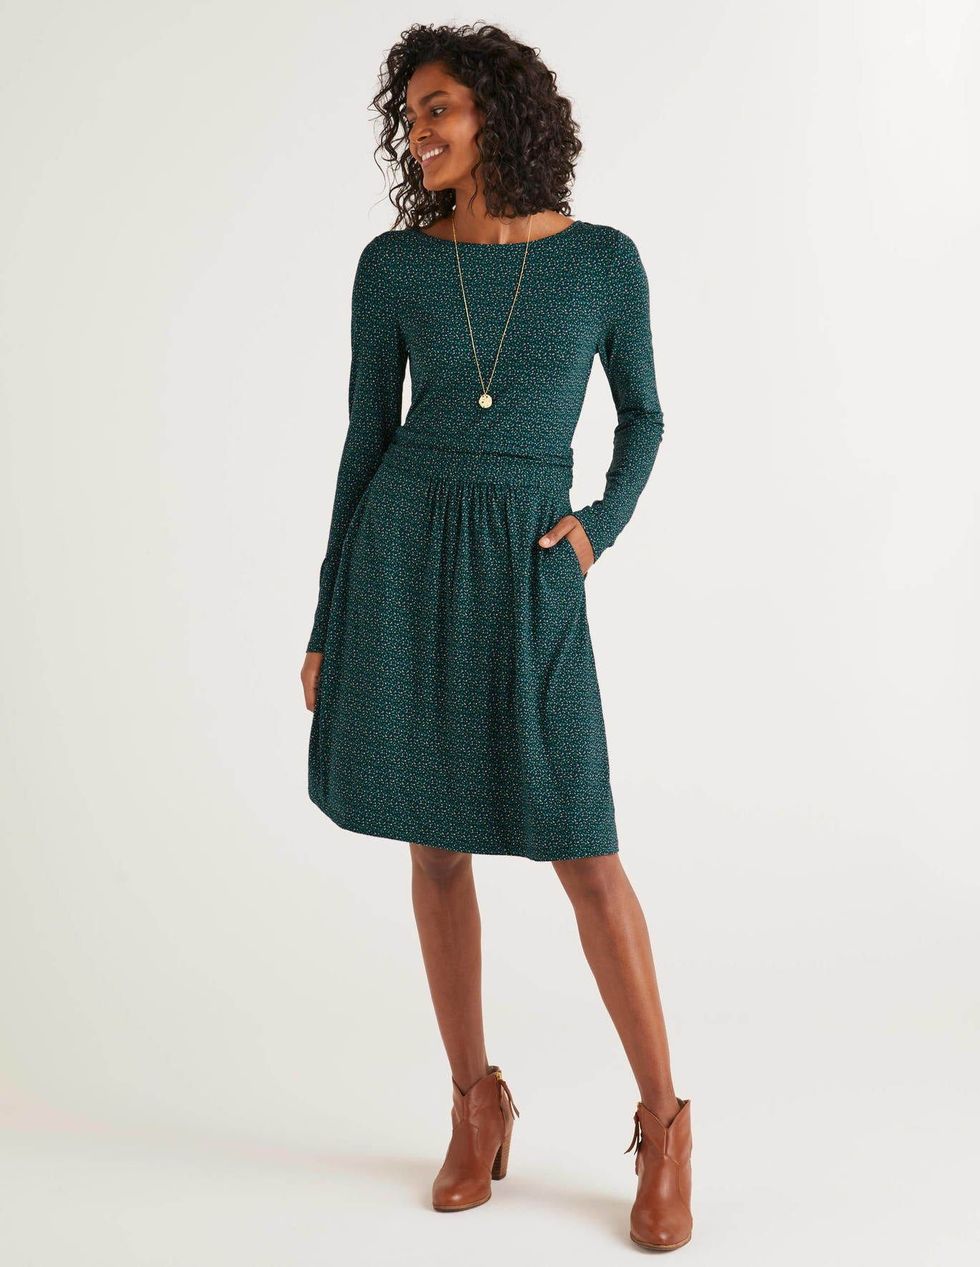 We're in love with this elegant Boden dress